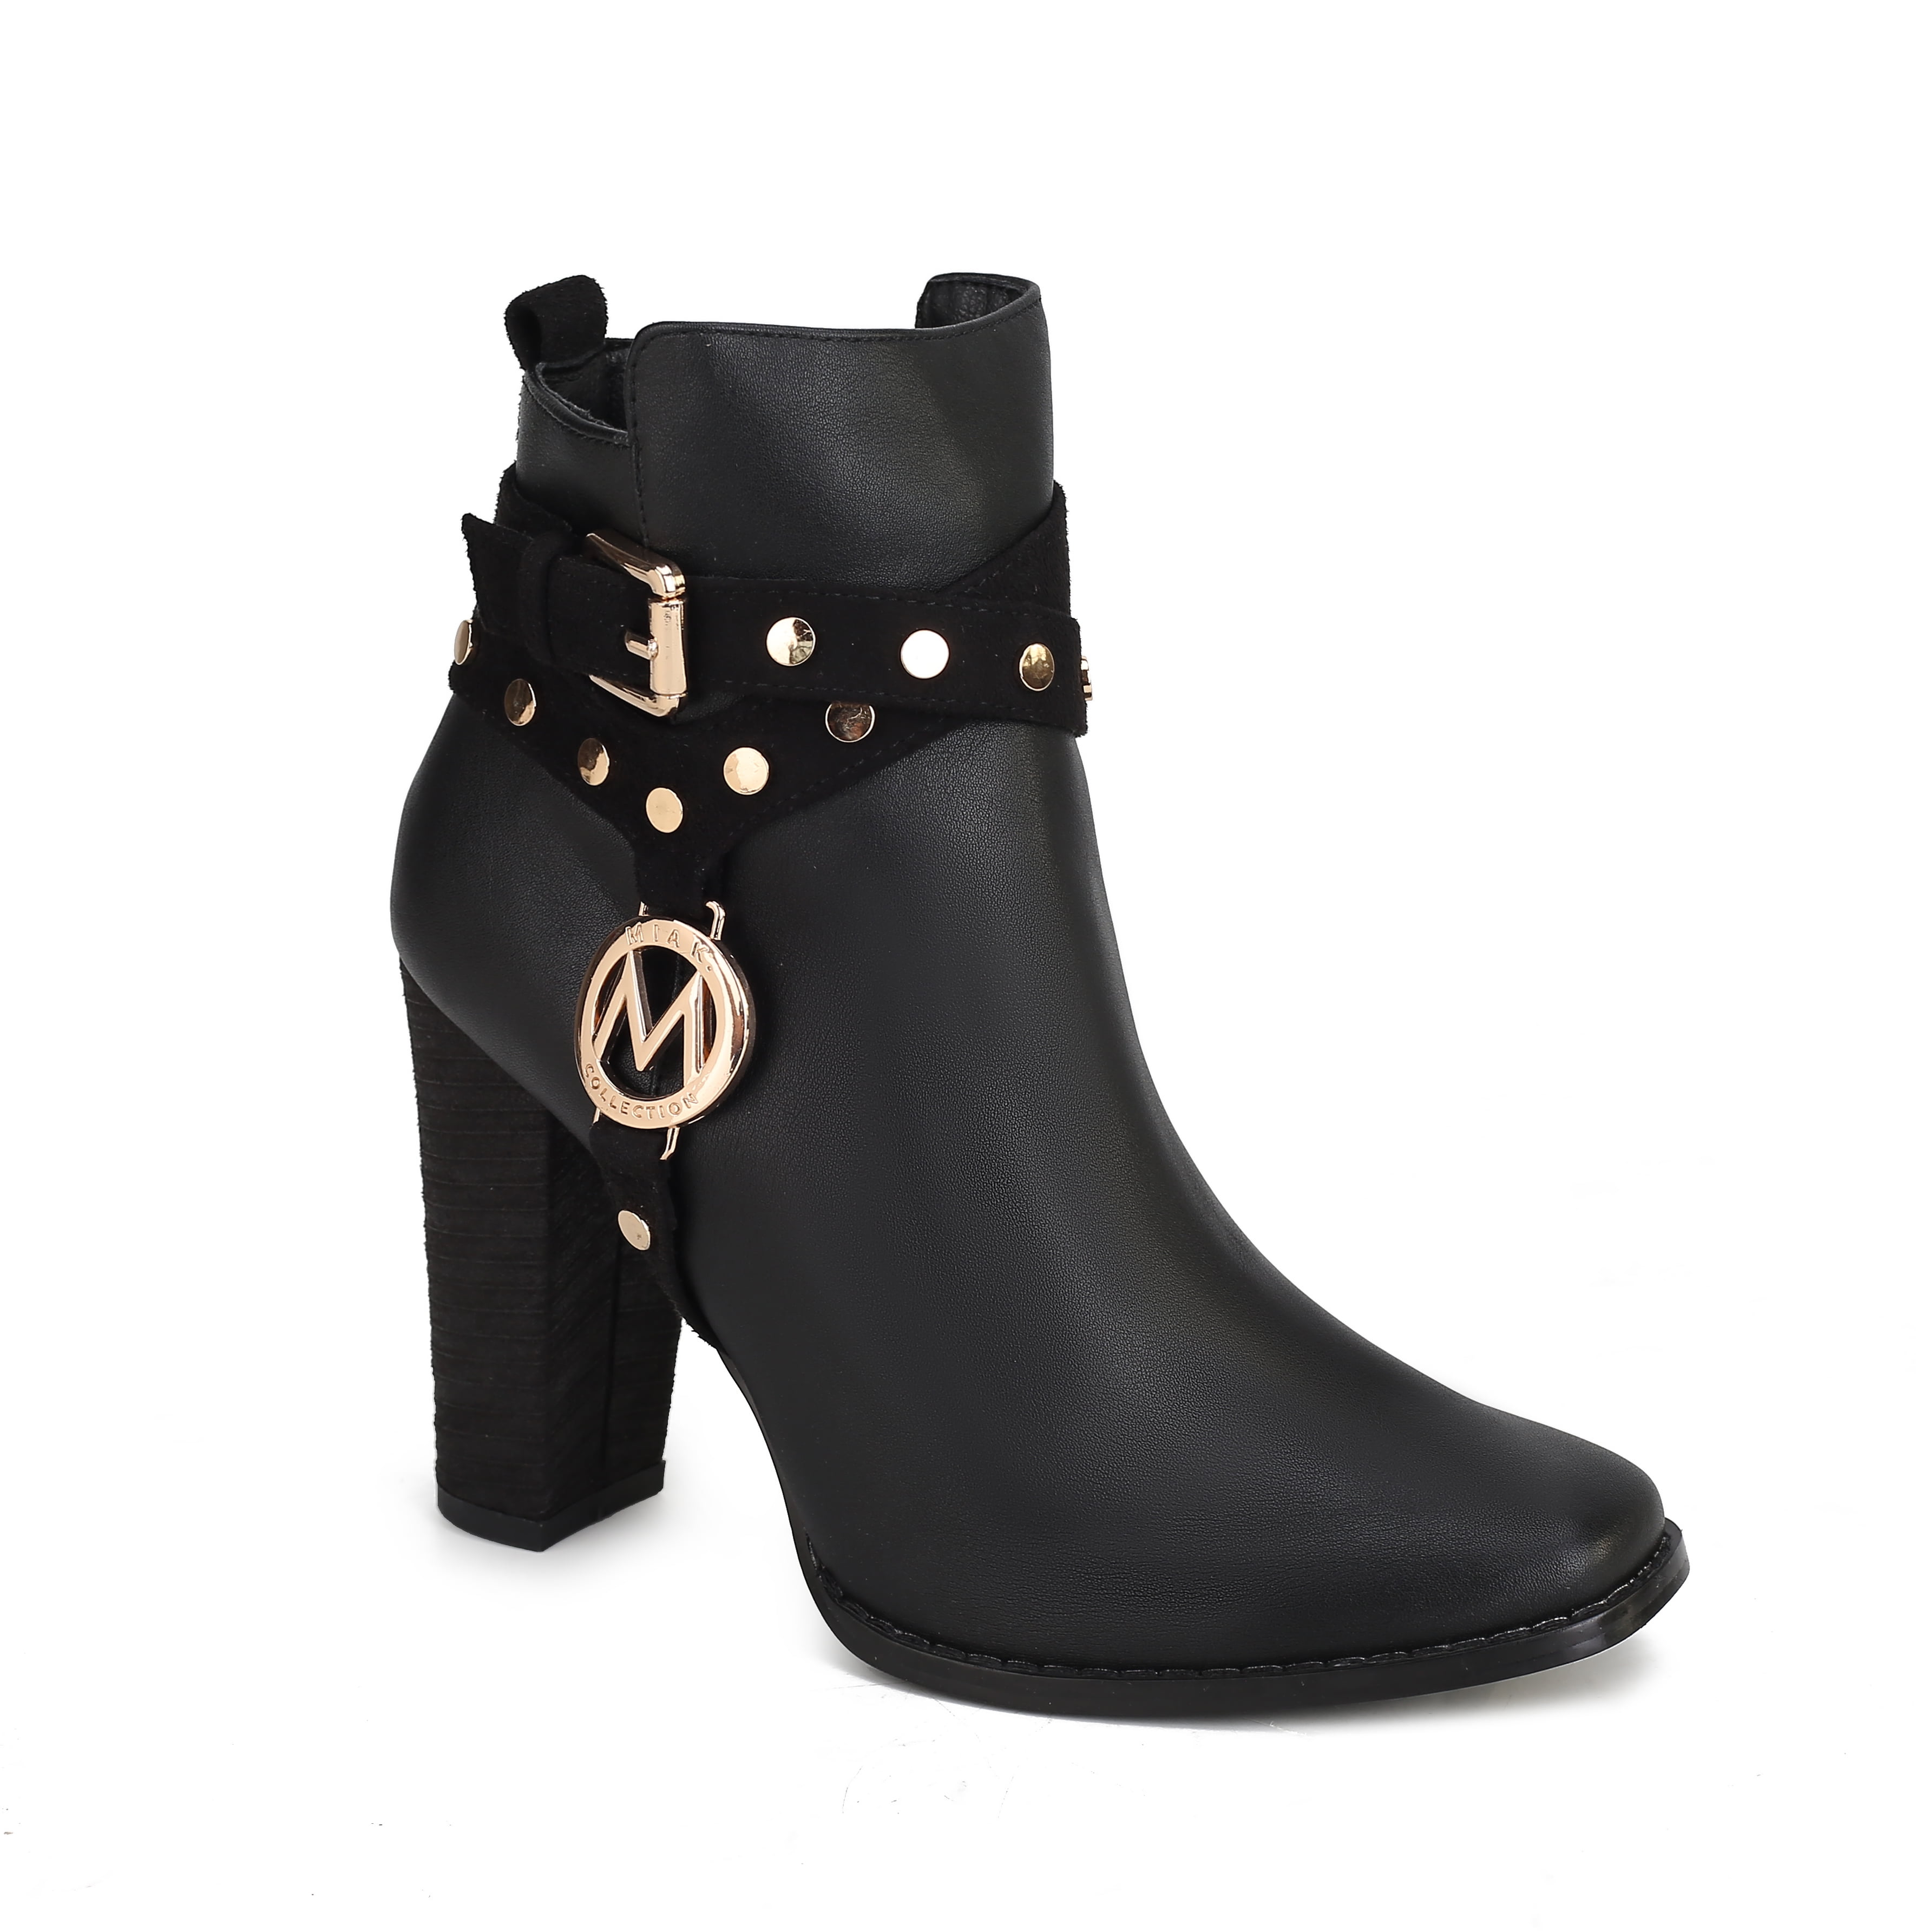 MKF Collection Women’s 4-inch Ankle Boots by Mia K - Walmart.com